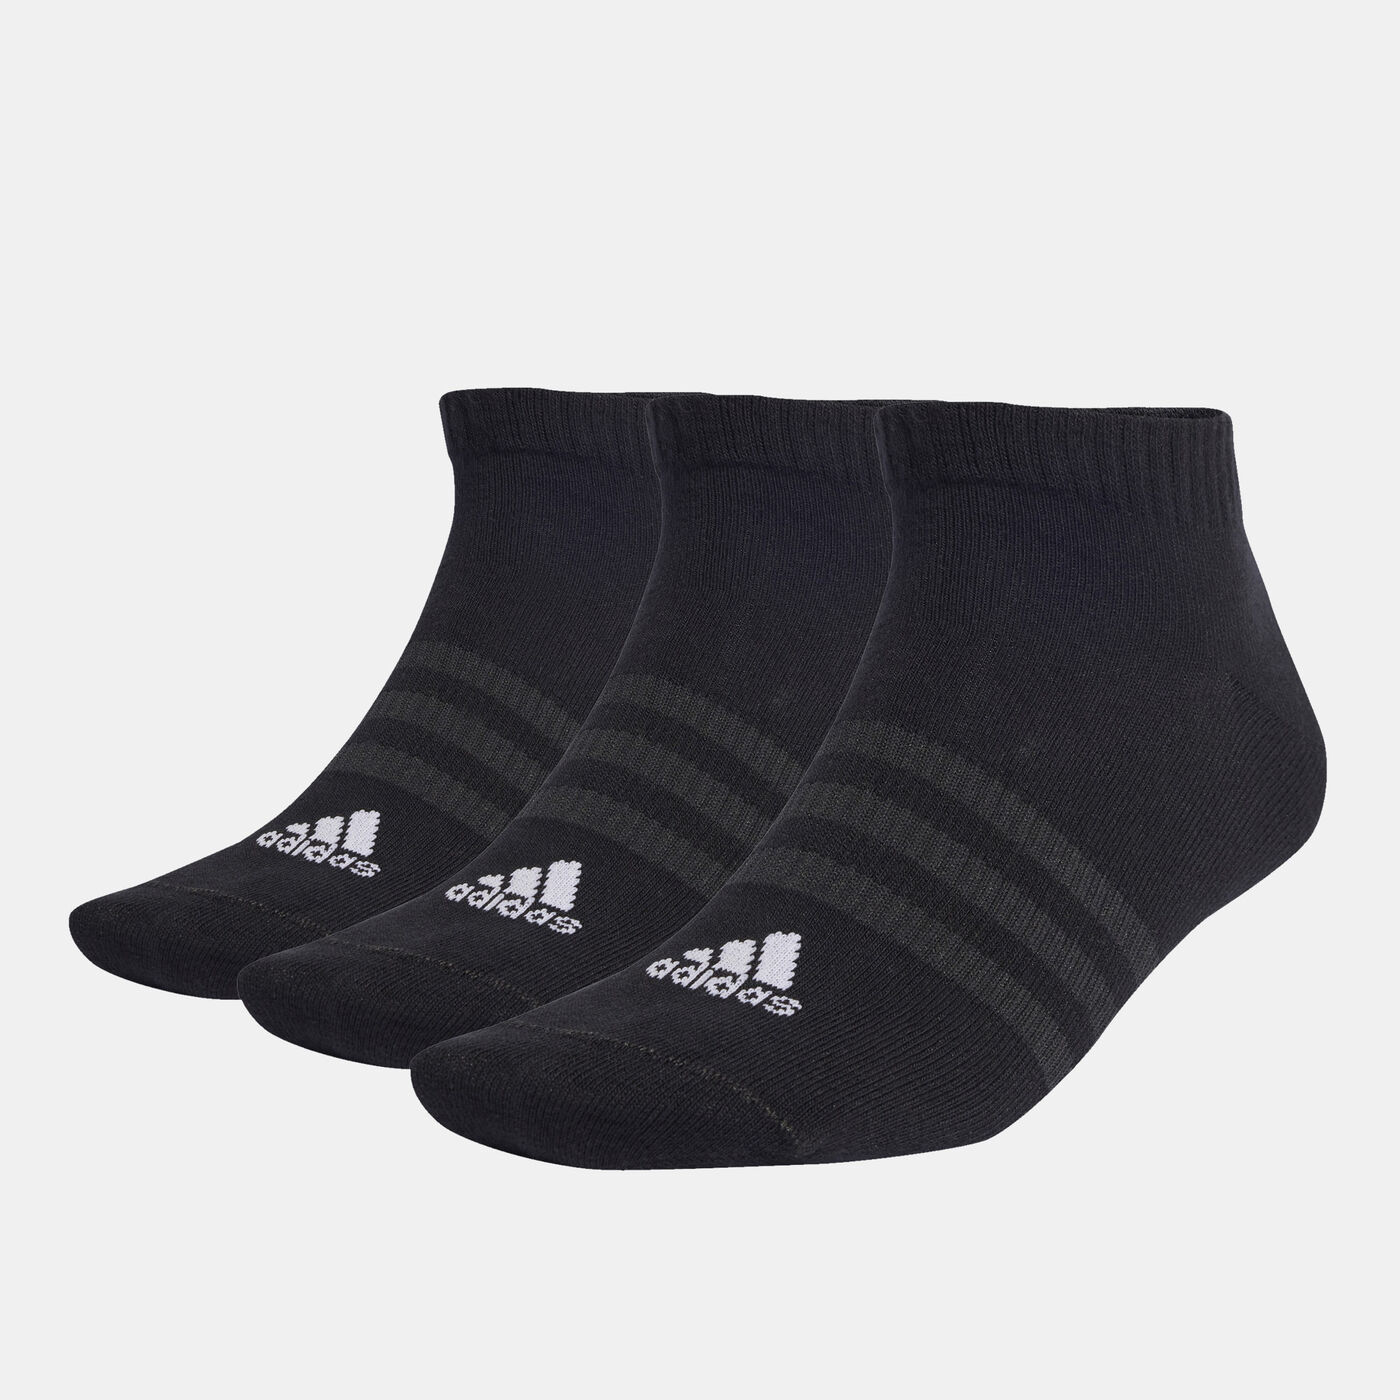 Men's Thin and Light Low-Cut Socks (3 Pack)